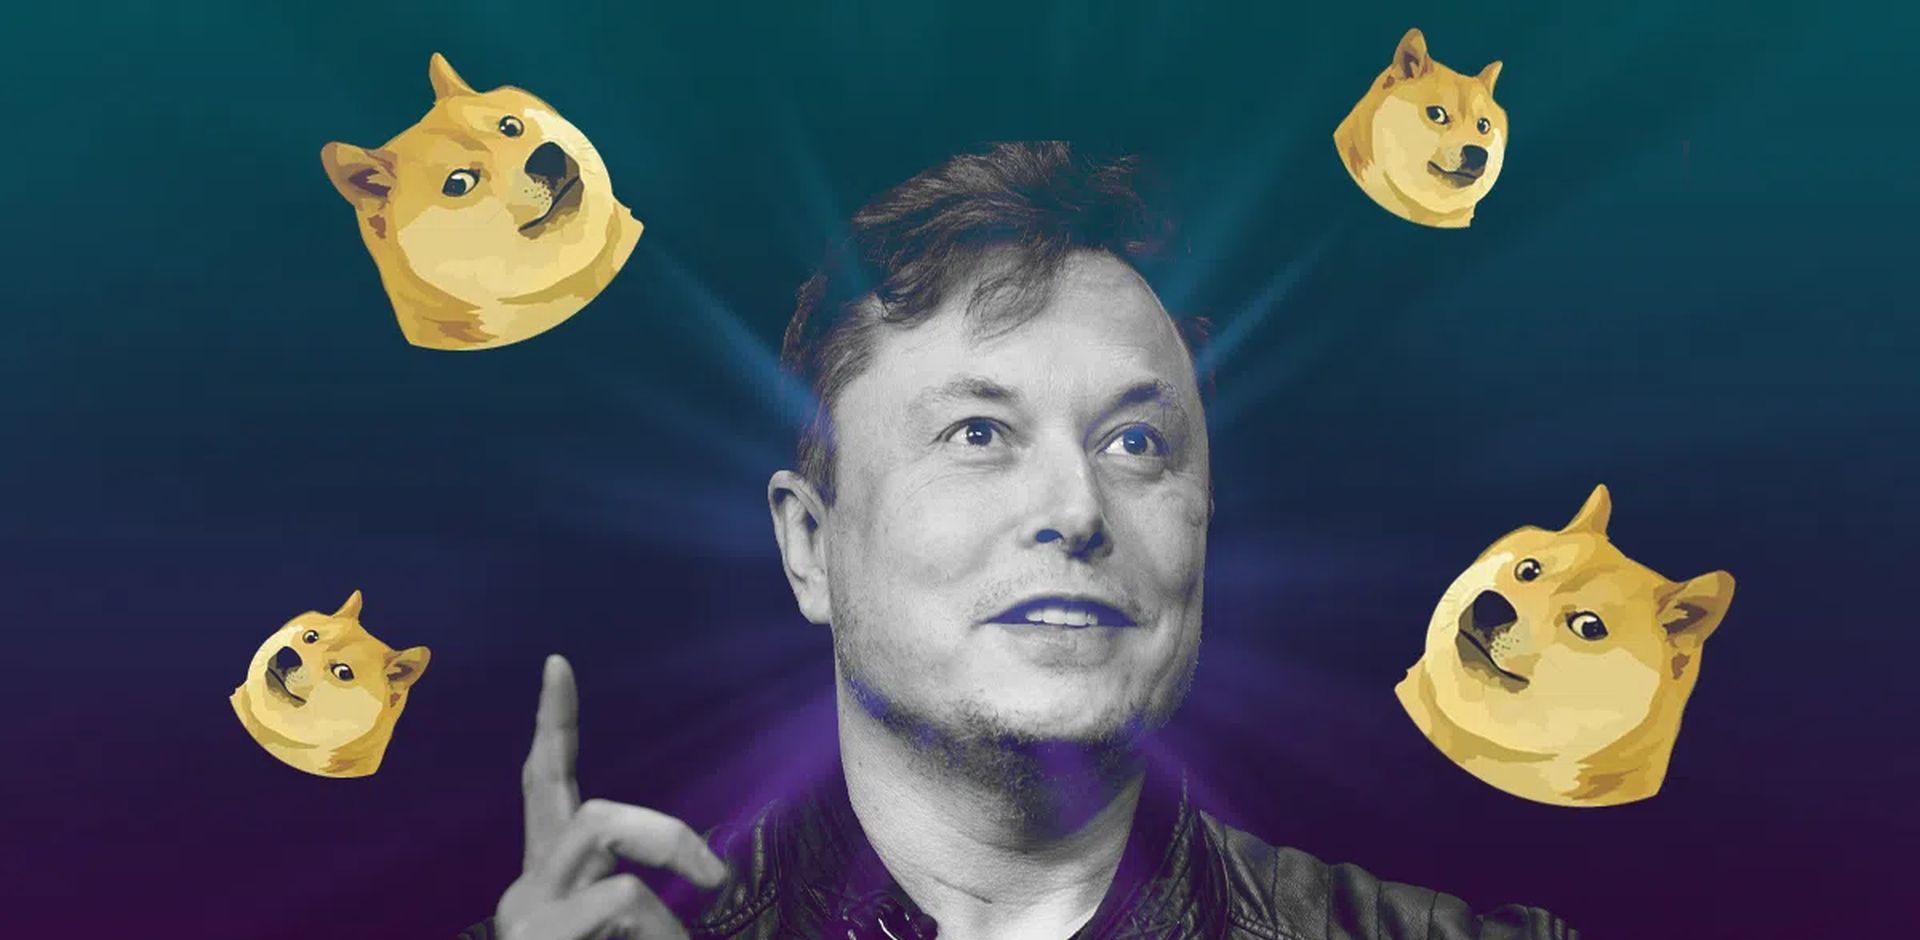 Even after the fact Elon Musk sued over claims of dogecoin pyramid scheme, he says that "I will keep supporting Dogecoin" and also claims he is still buying.